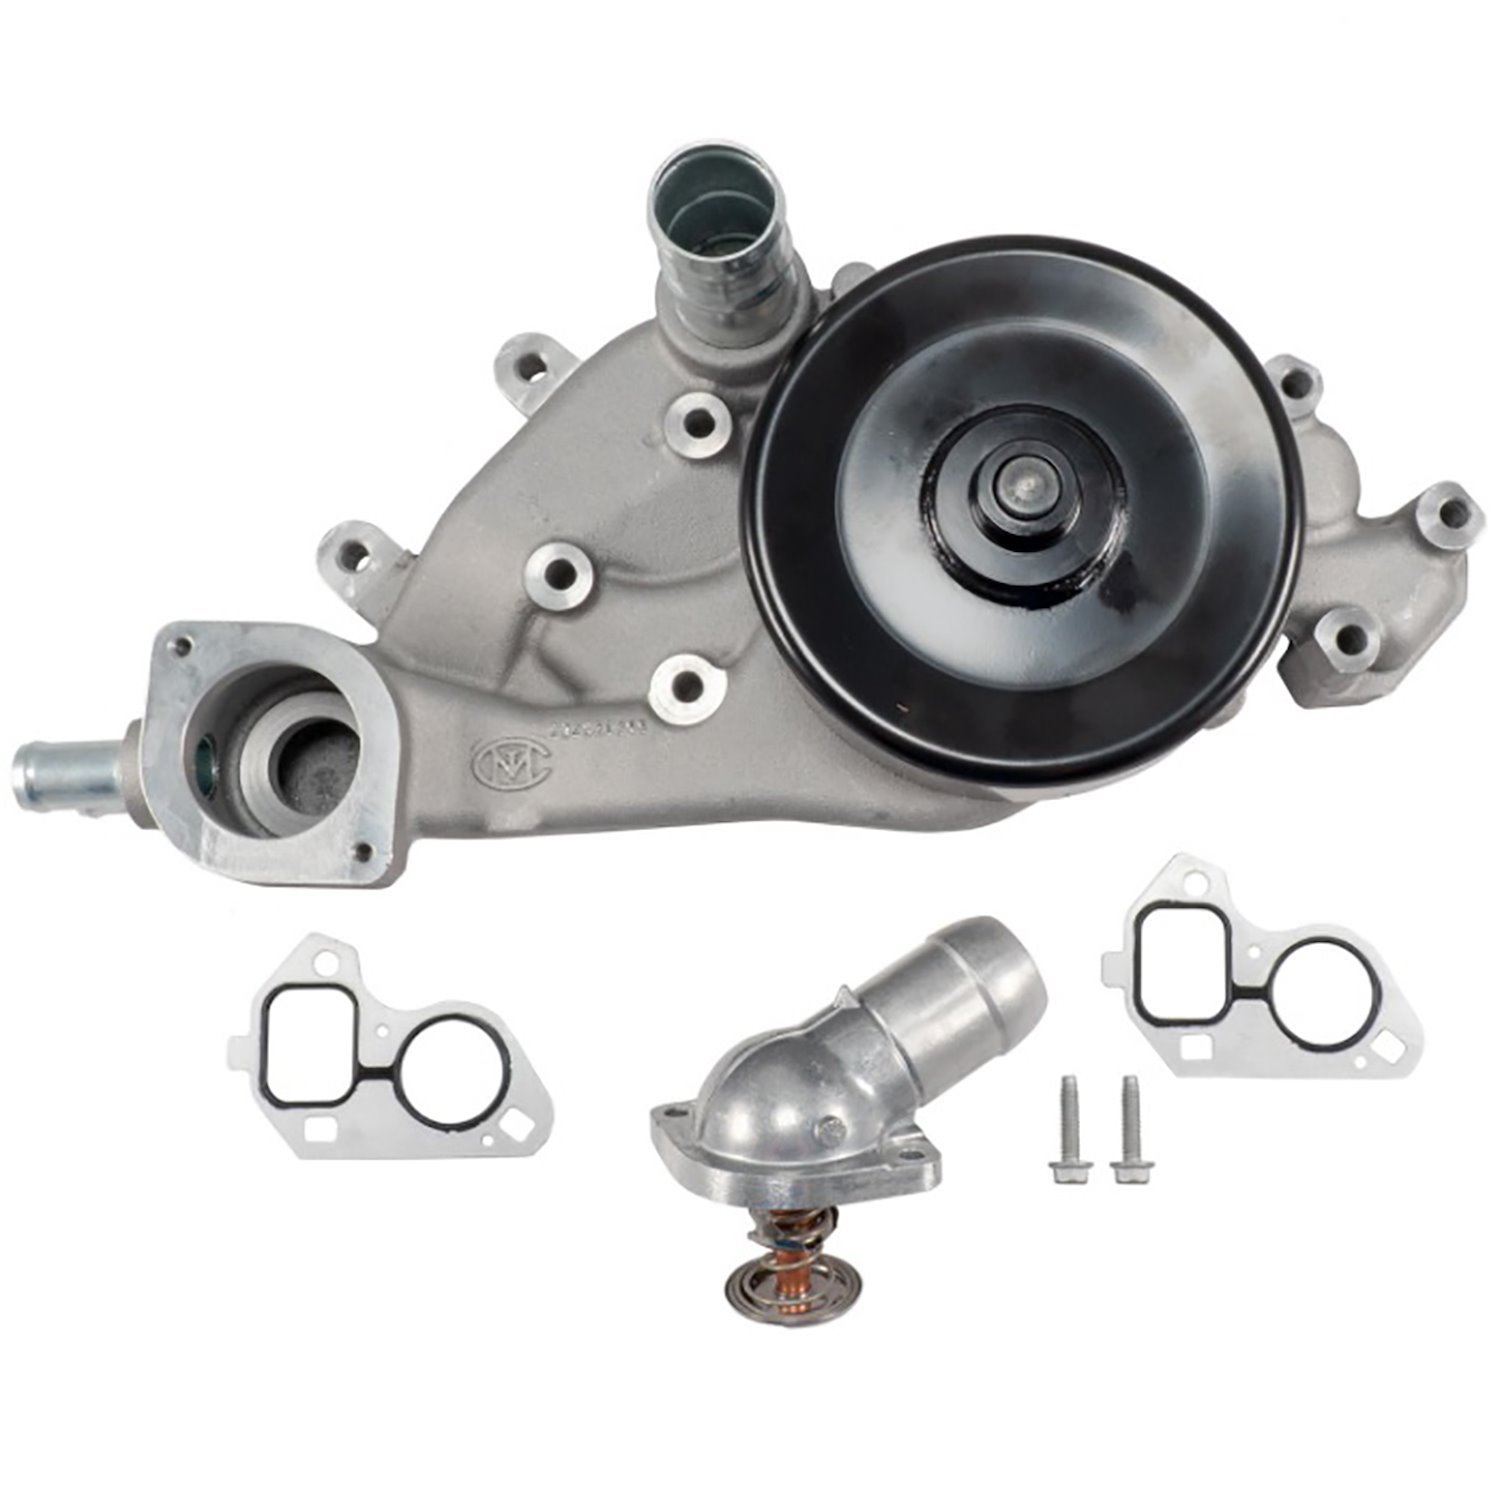 Water Pump with Thermostat 2004-2009 GM CTS, Corvette,